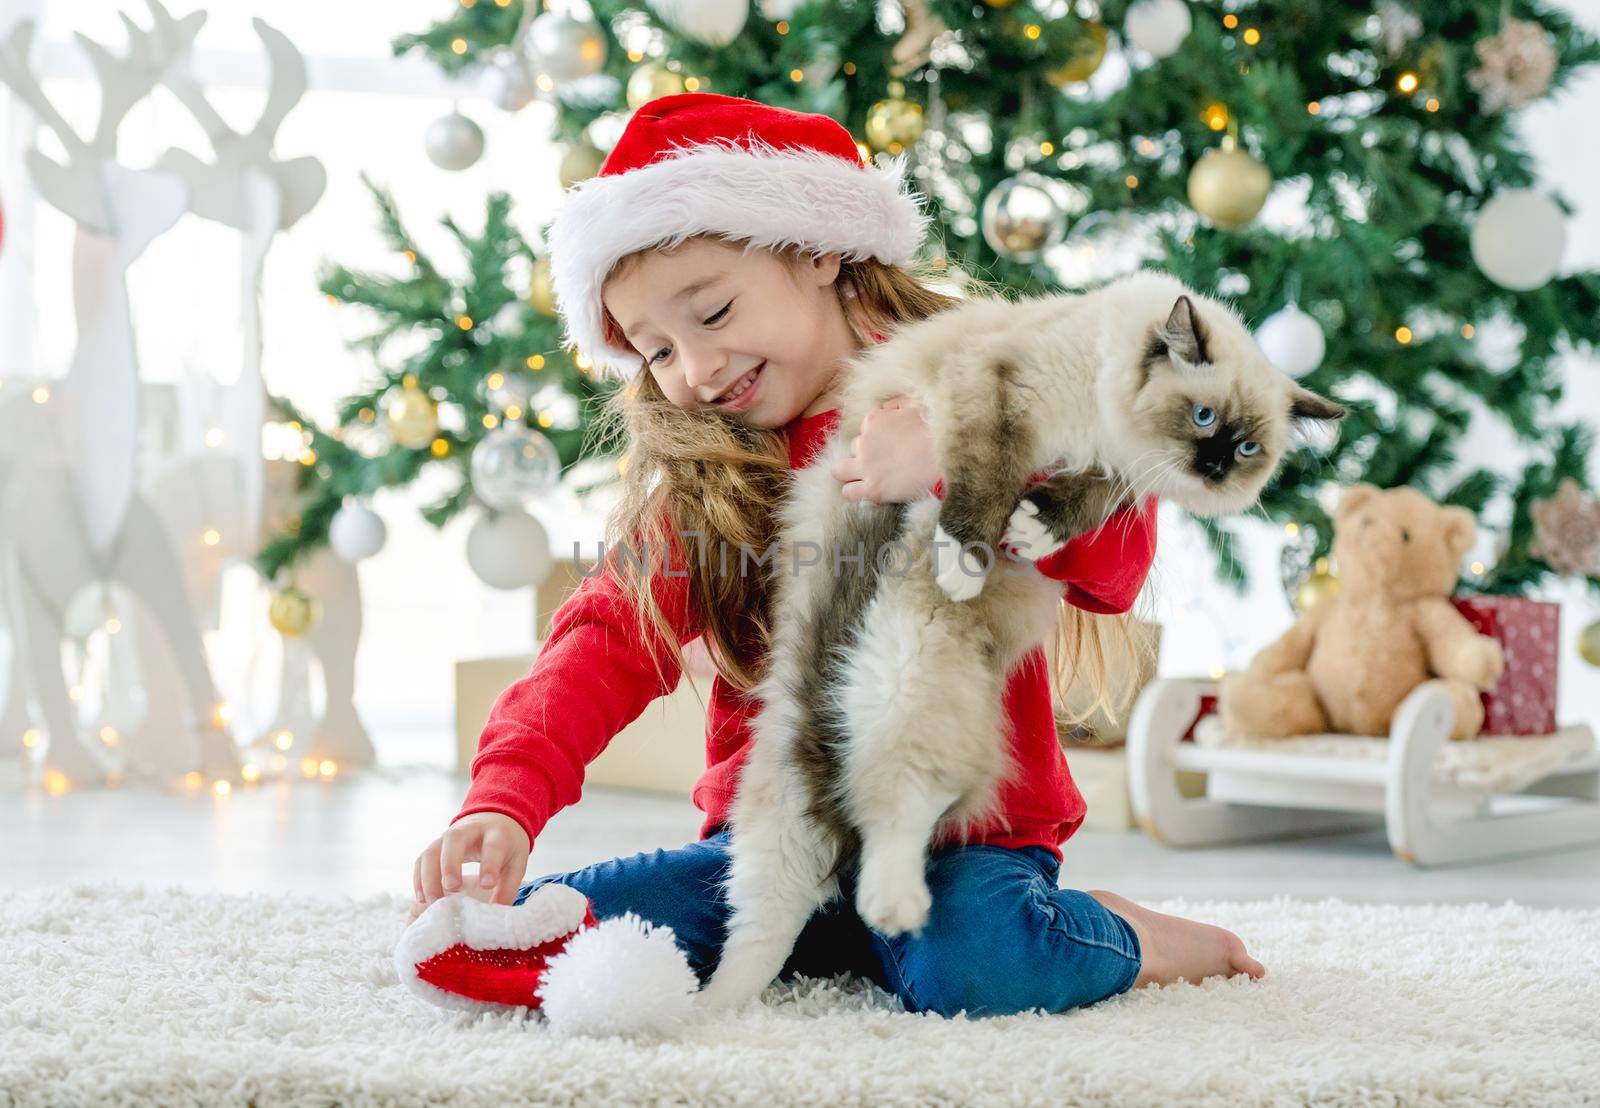 Child girl with ragdoll cat sitting on floor wearing Santa hat in Christmas time. Pretty kid holding feline kitty pet close to festive Xmas tree in New Year holidays